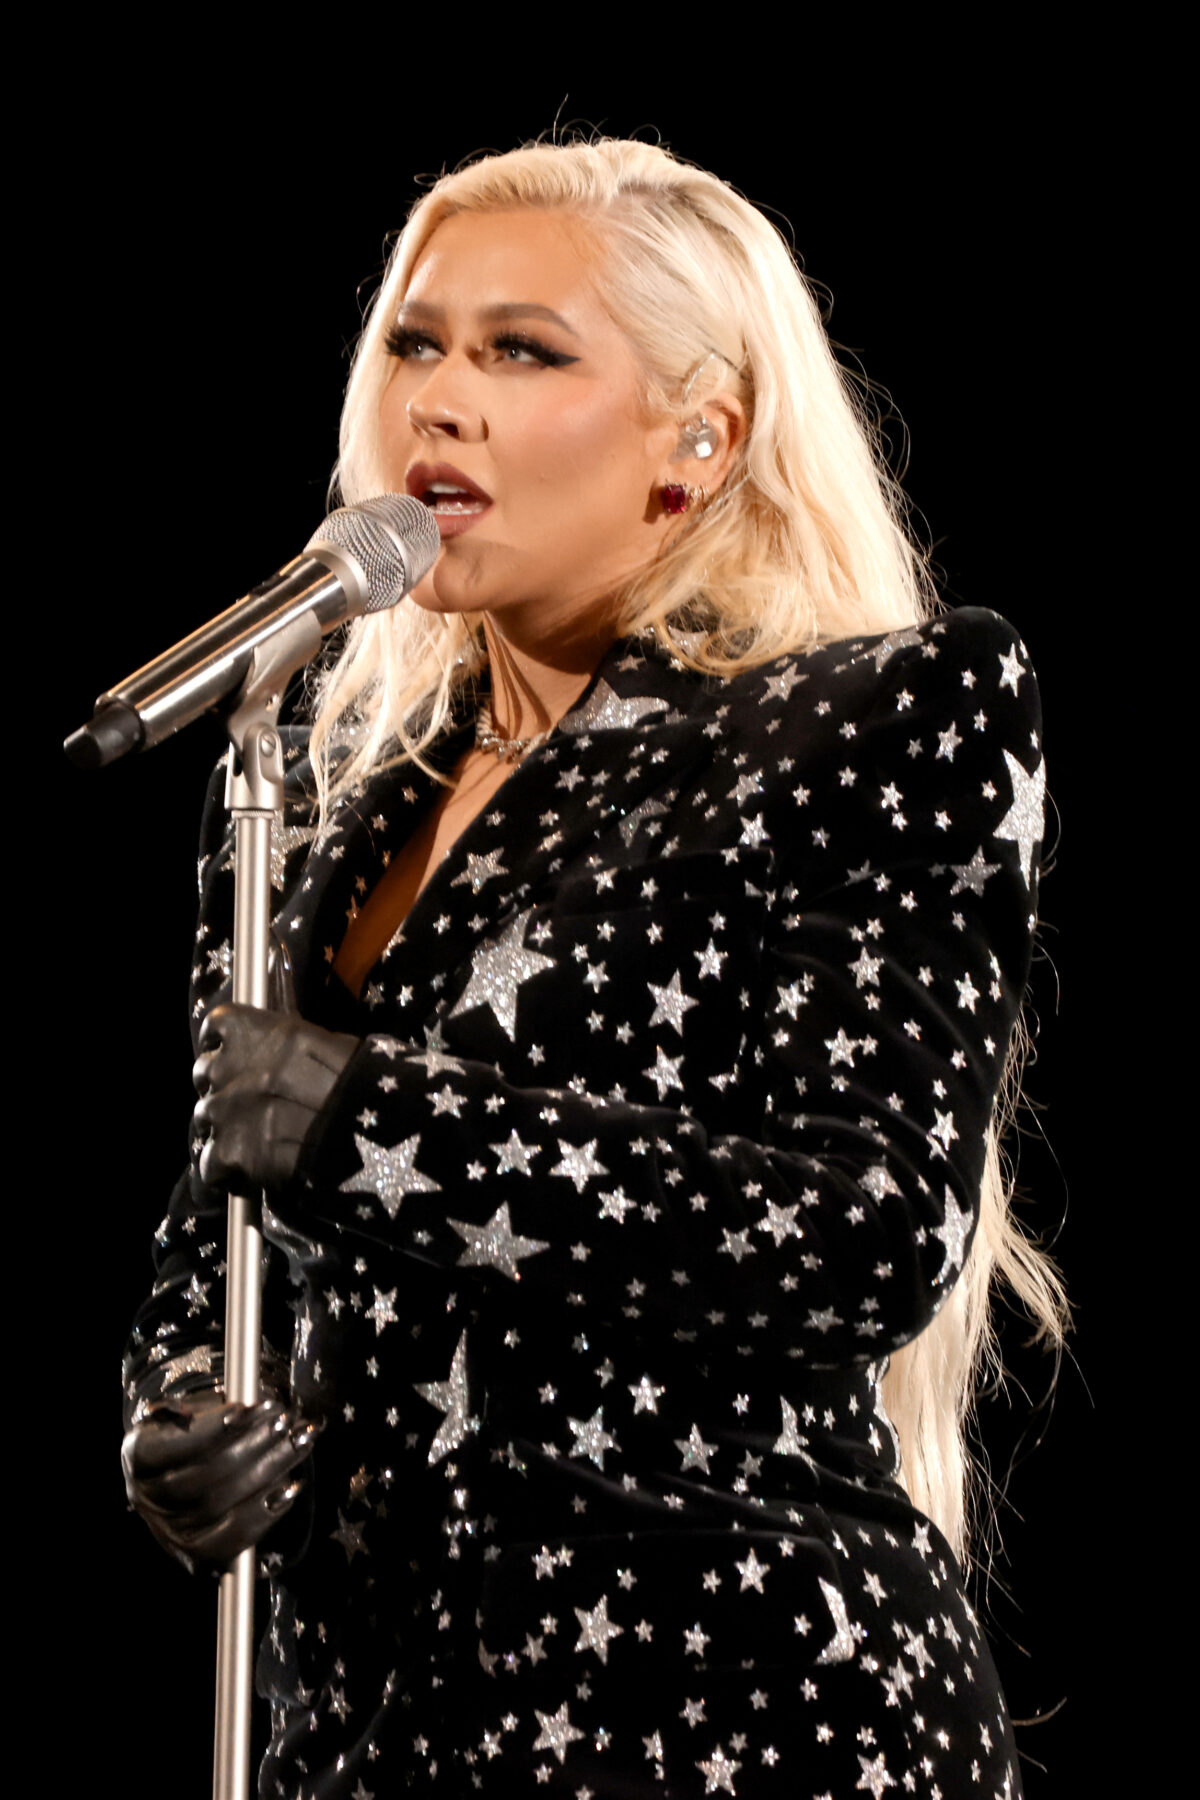 INGLEWOOD, CALIFORNIA - DECEMBER 01: Christina Aguilera performs onstage during the AHF World AIDS Day 2021 concert at The Forum on December 01, 2021 in Inglewood, California. AIDS Healthcare Foundation's (AHF) free, sold-out concert marks World AIDS Day and AHF's 35th anniversary at a star-studded event. AHF's 